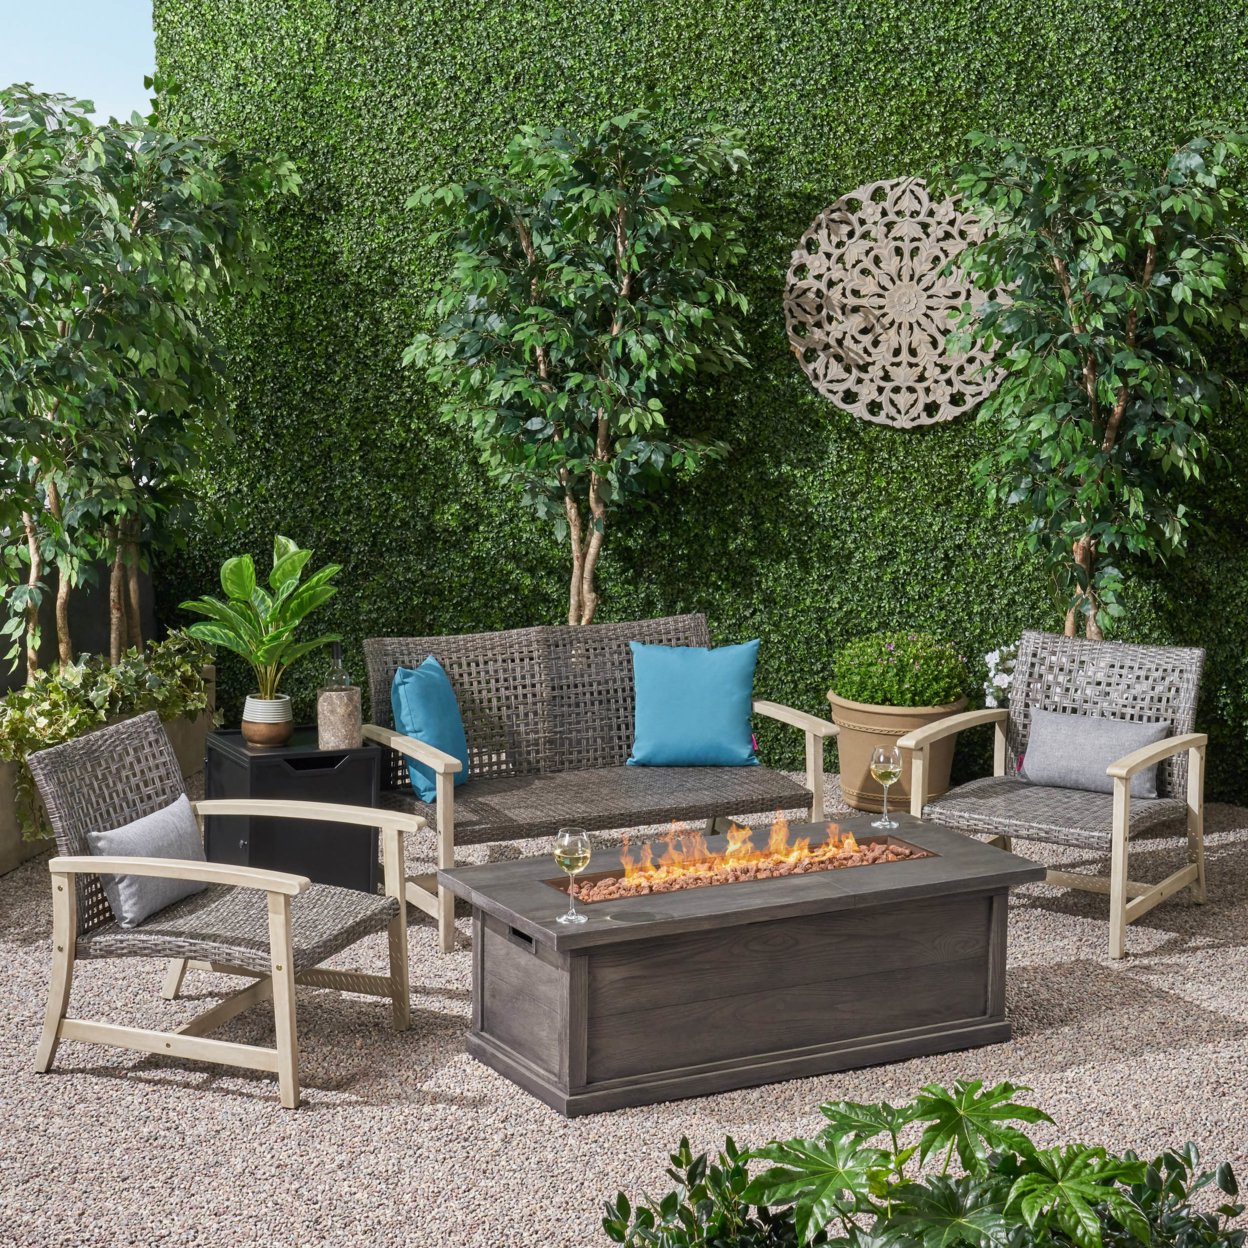 Rachel Outdoor 5 Piece Wood And Wicker Chat Set With Fire Pit - Gray + Natural Finish + Brown + Black